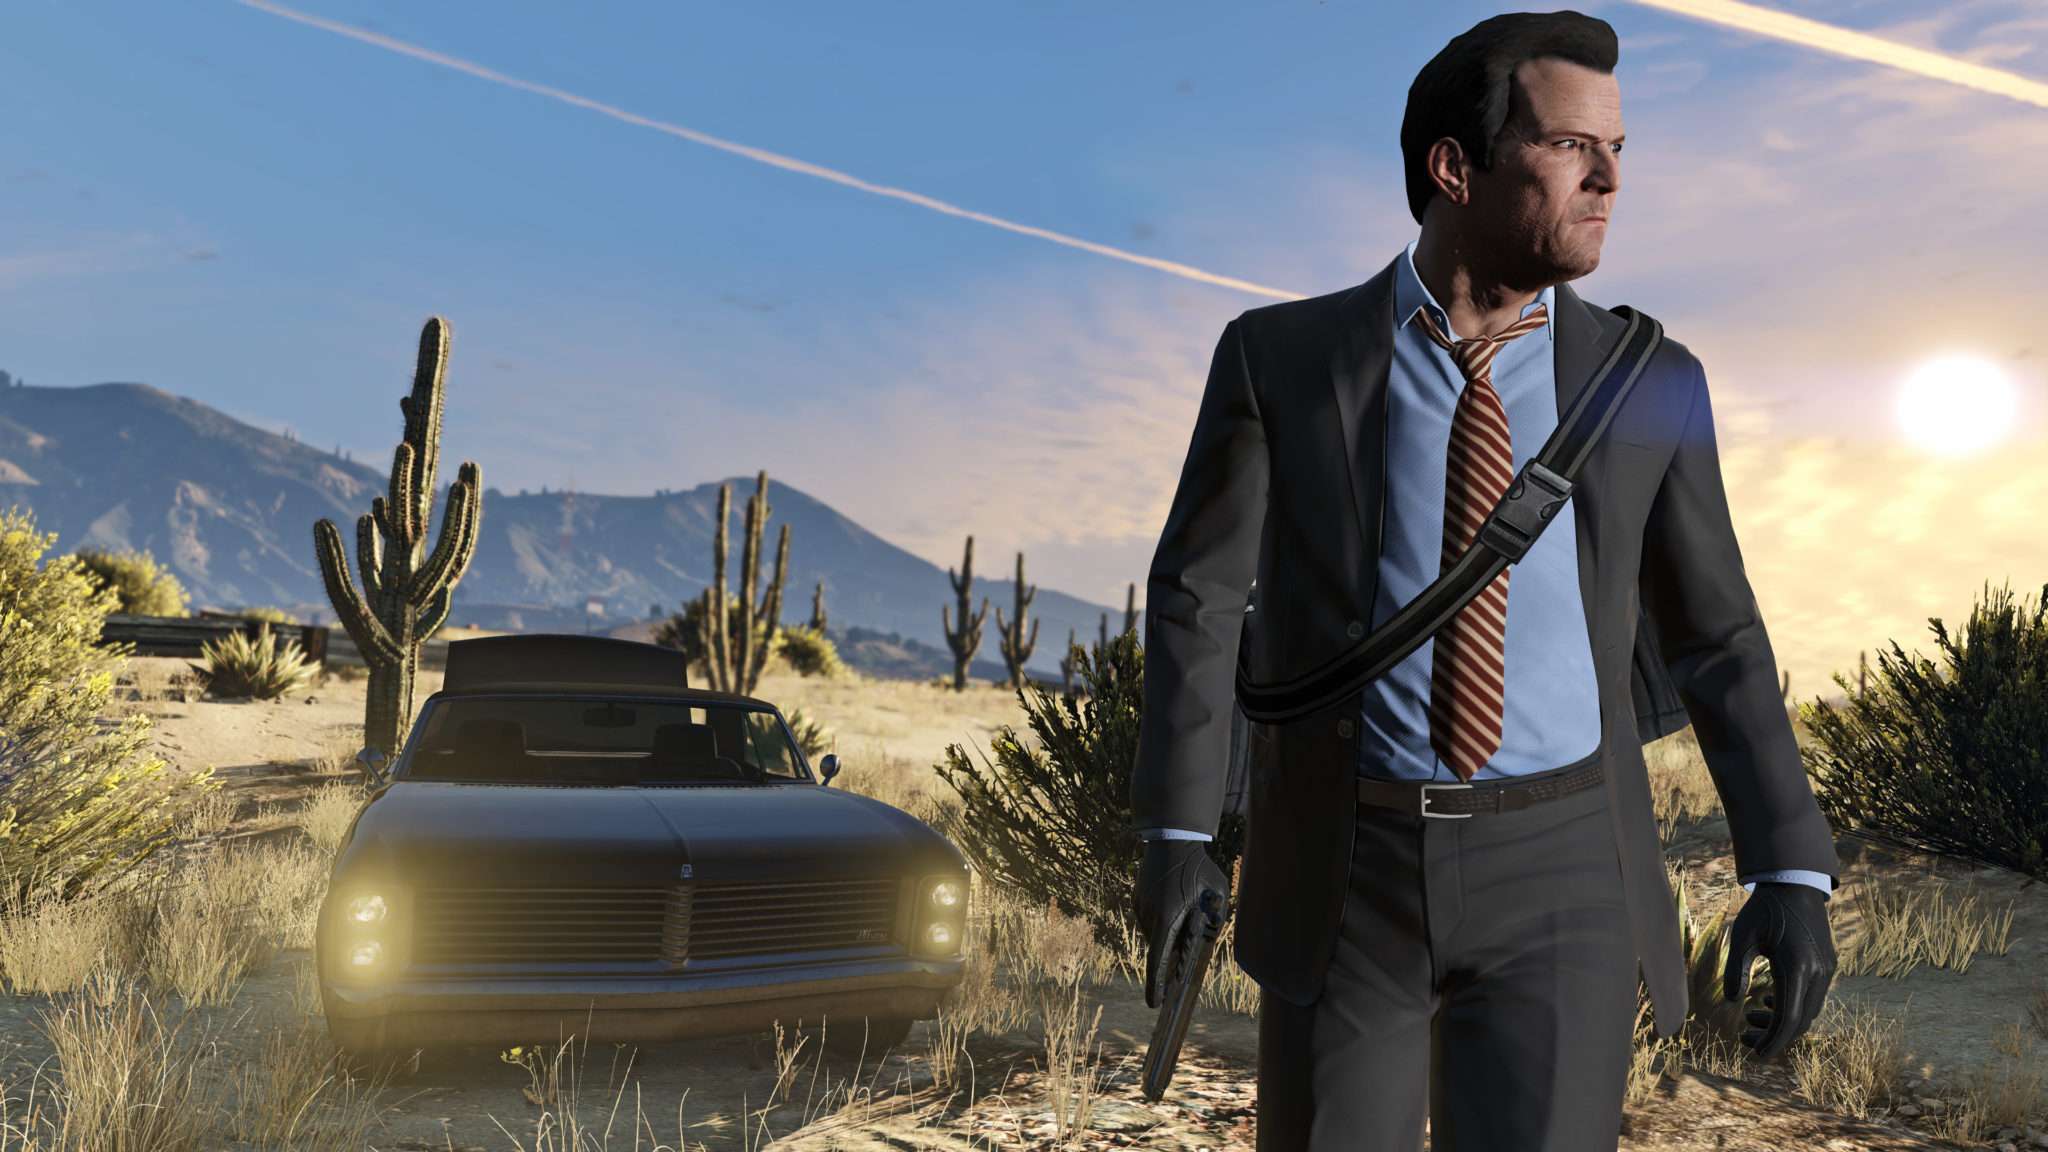 Grand Theft Auto V is headed to PlayStation 5 in 2021.